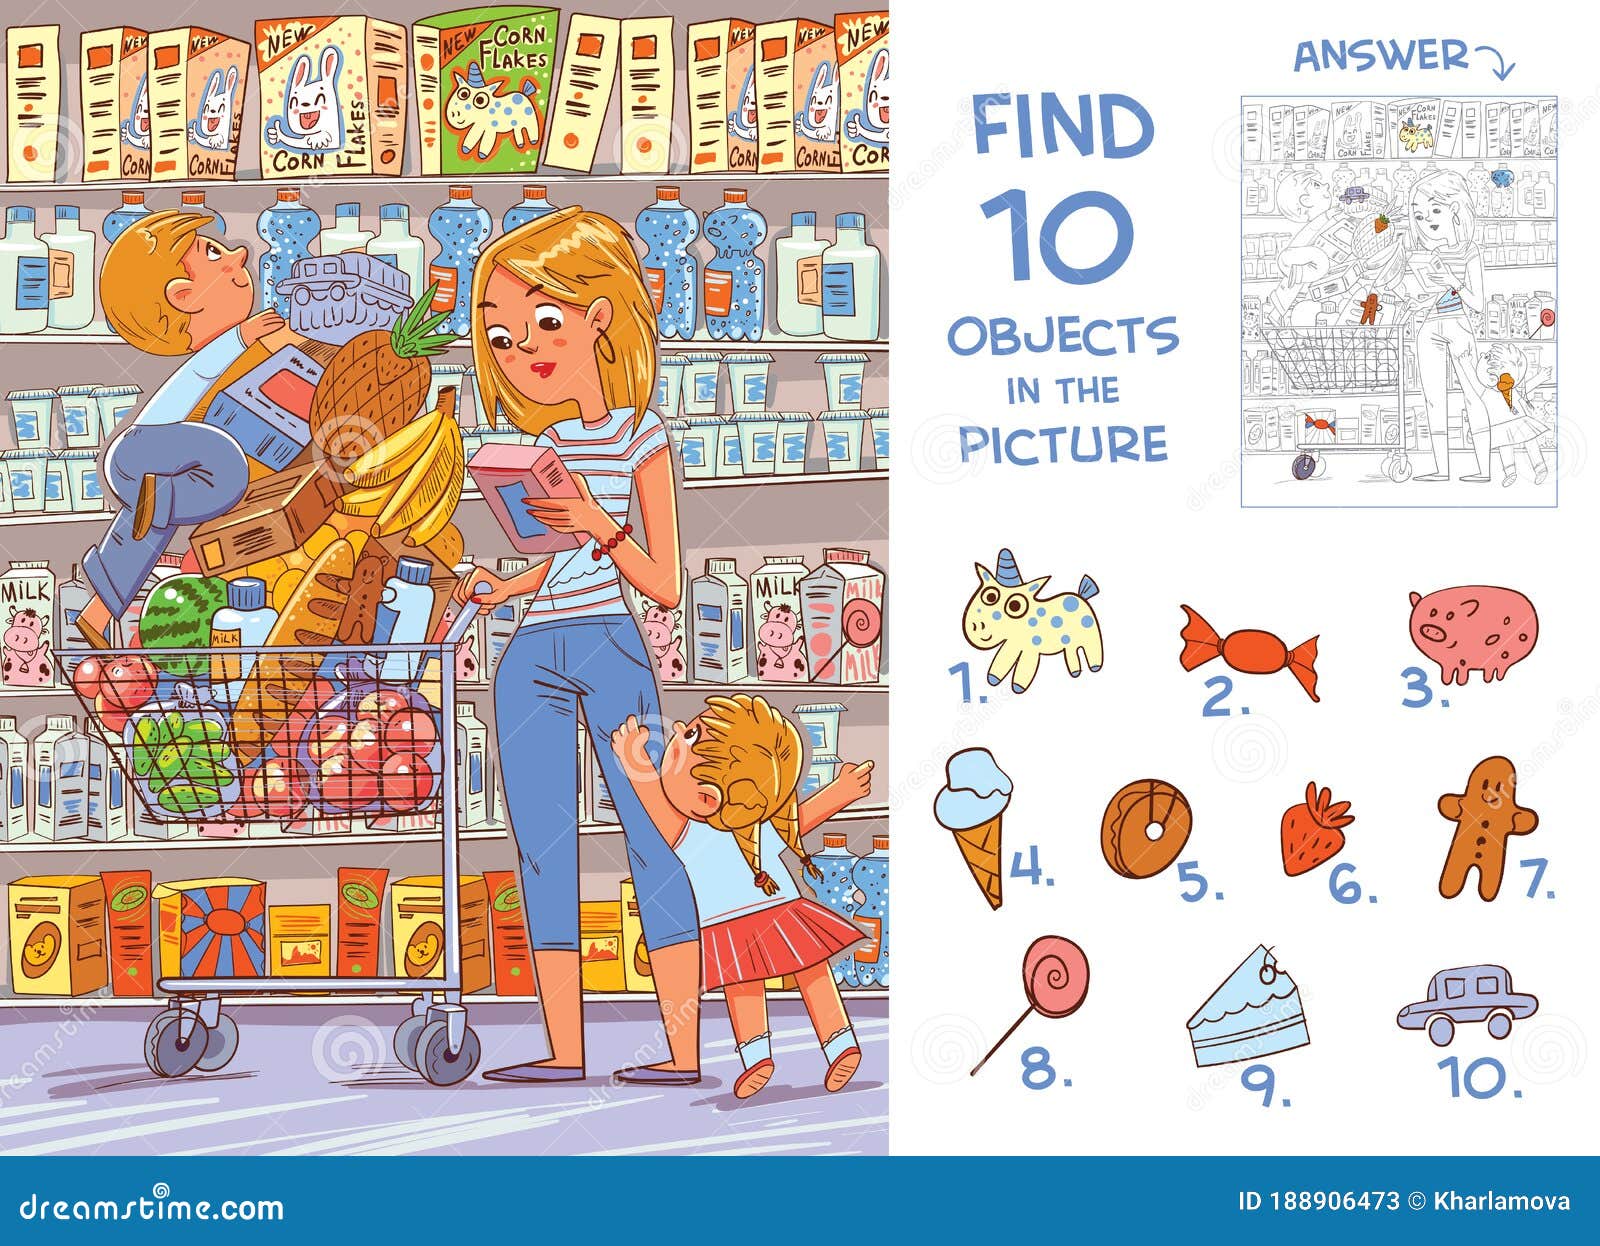 find objects in the picture. mother and two young children are shopping in a supermarket